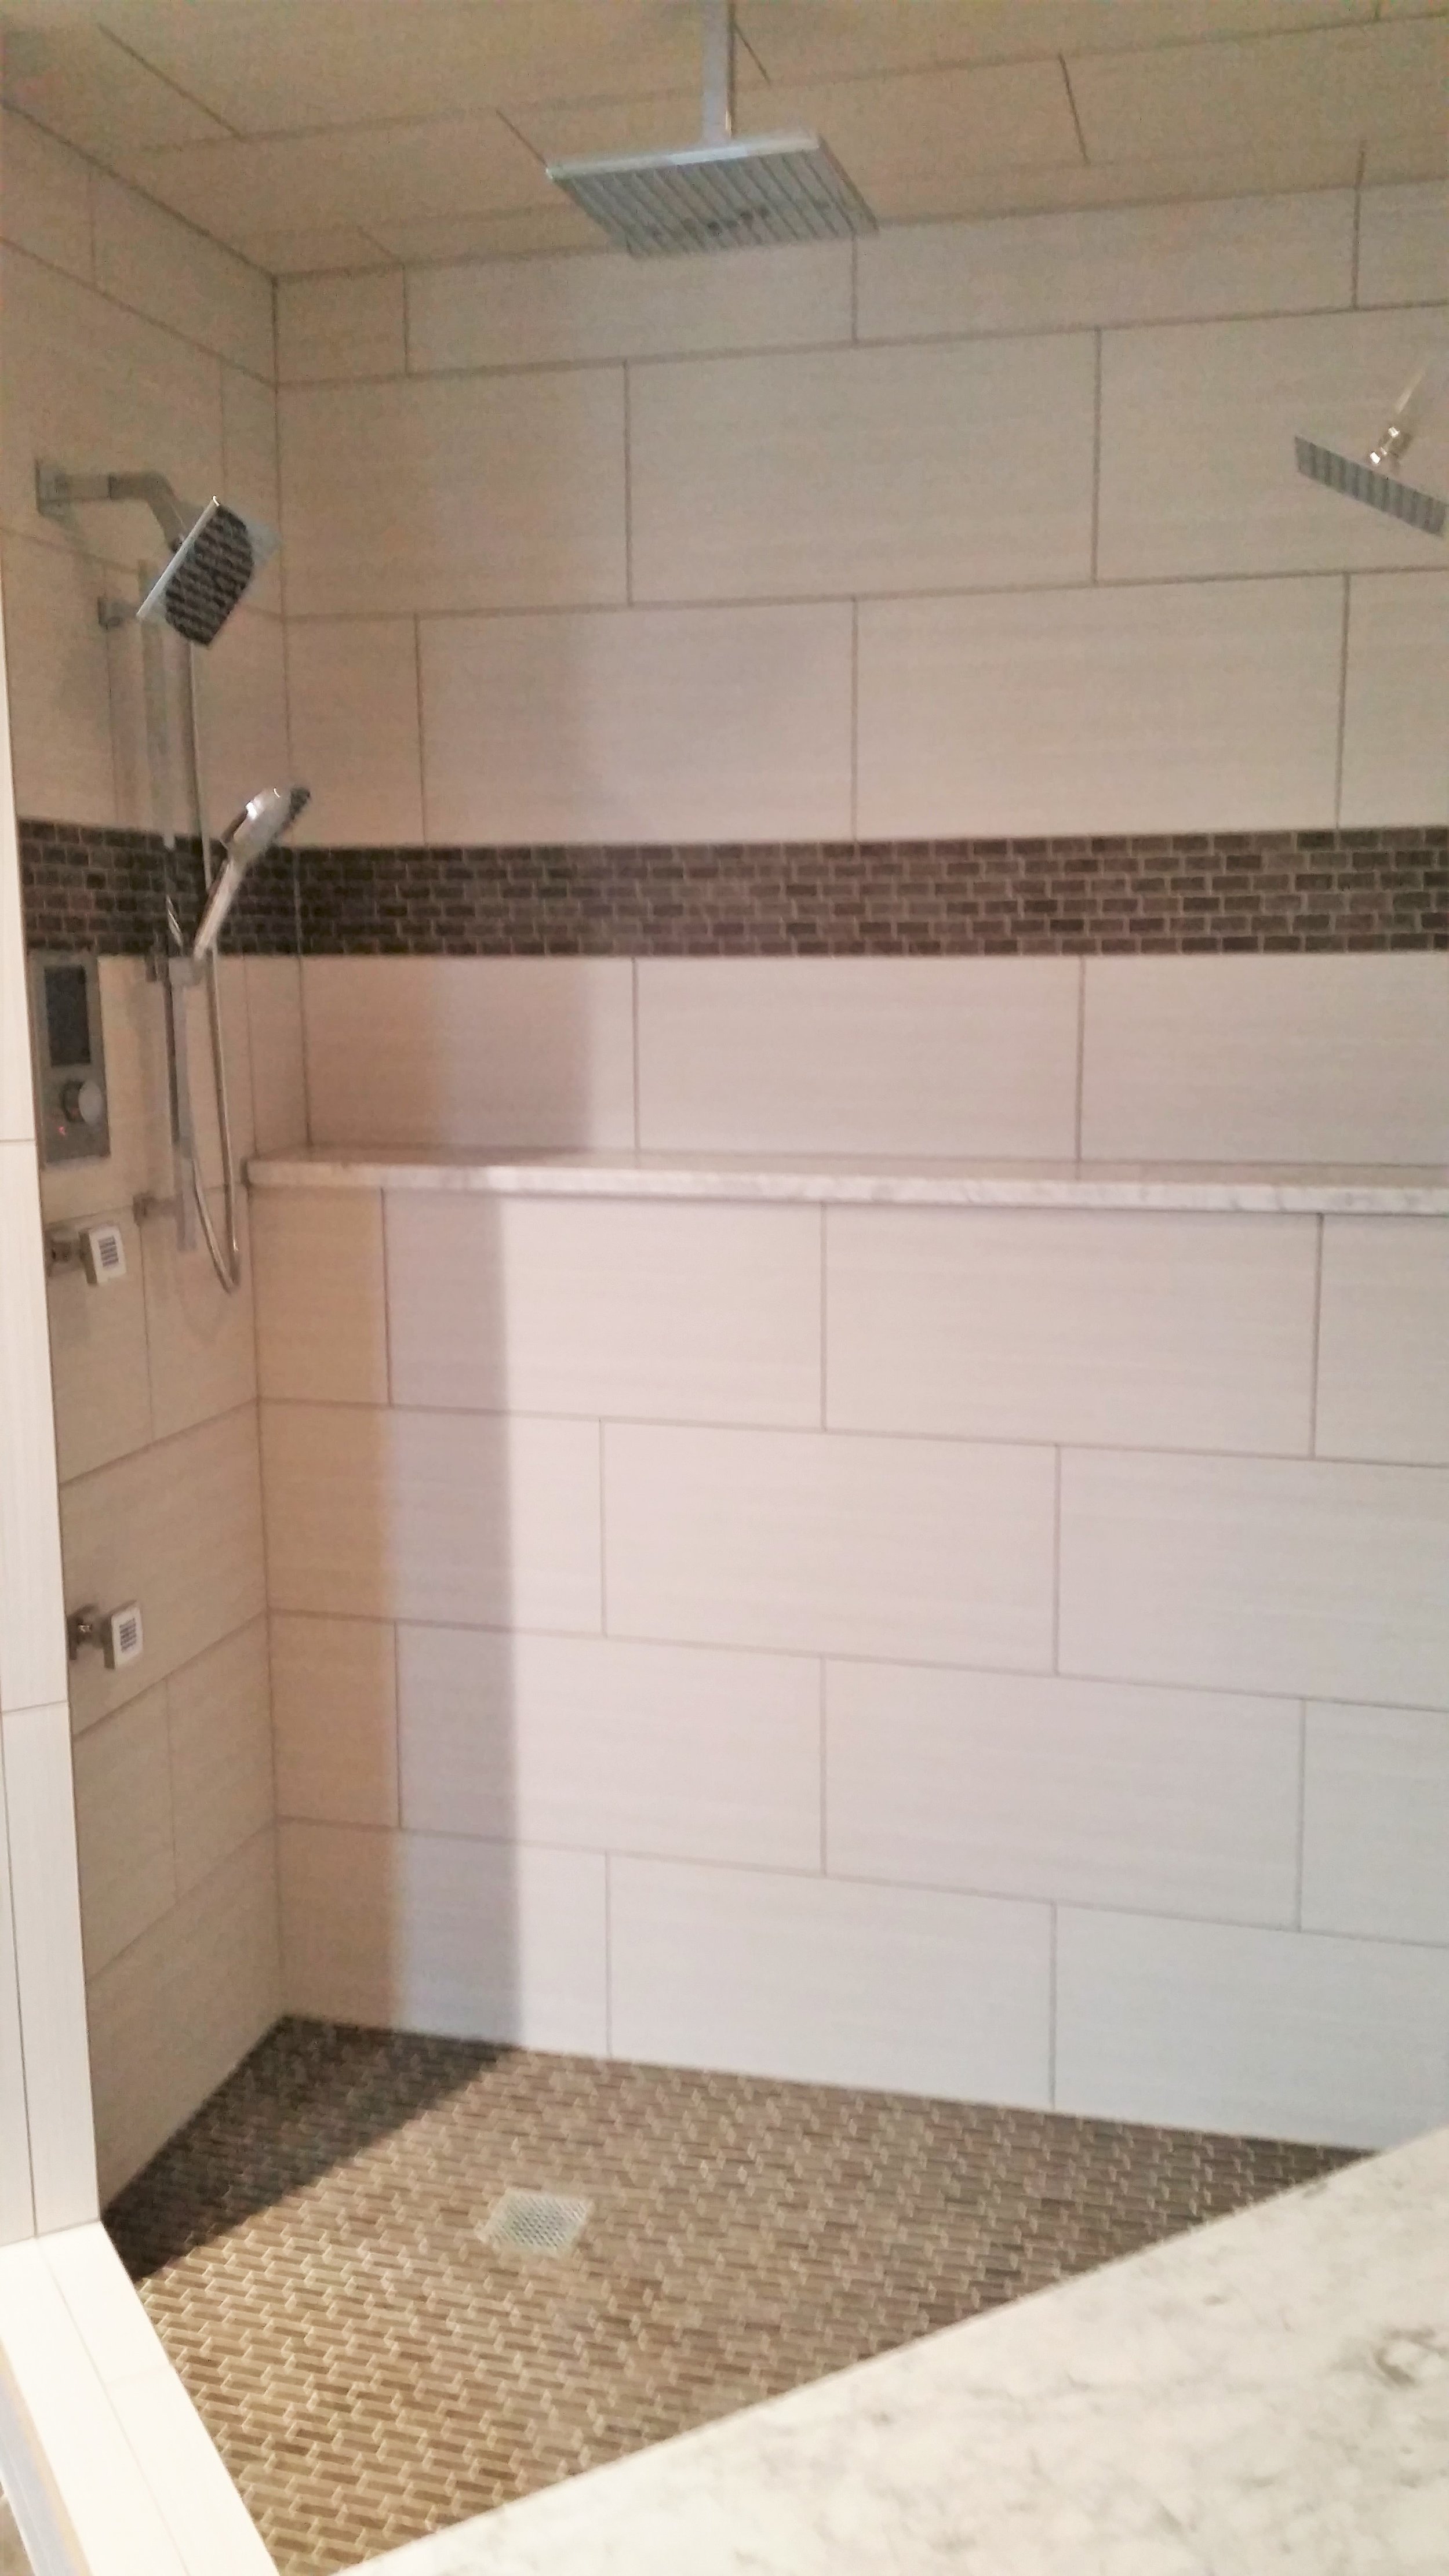 R &amp; R Ceramics LLC Residential and Commercial Bath Tile, Kitchen Tile, Floor Tile, Shelby Township, Michigan